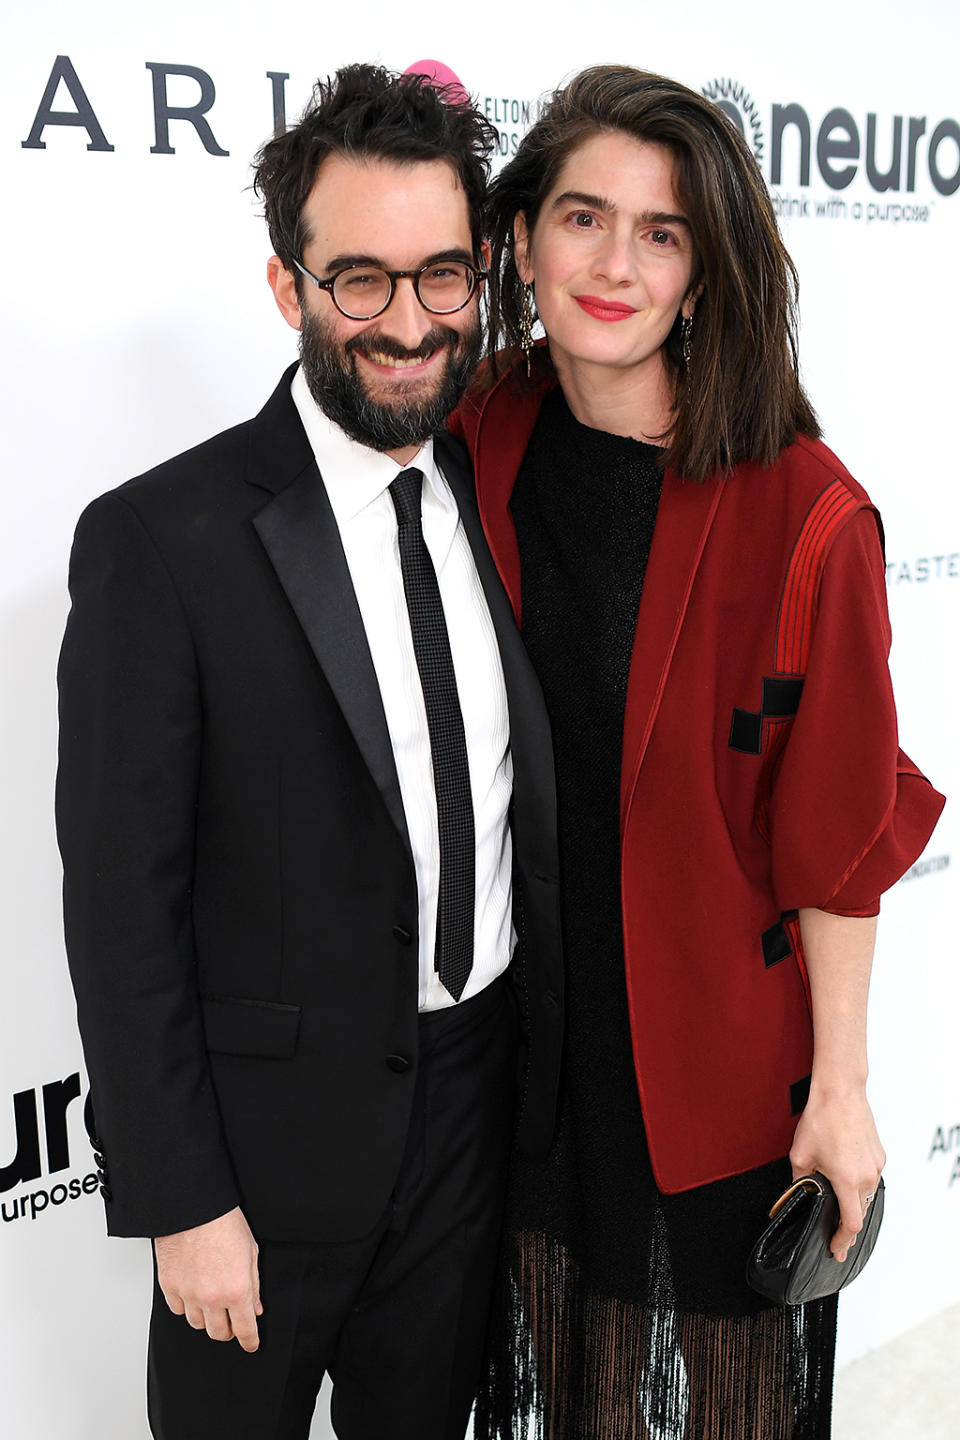 Jay Duplass and Gaby Hoffman